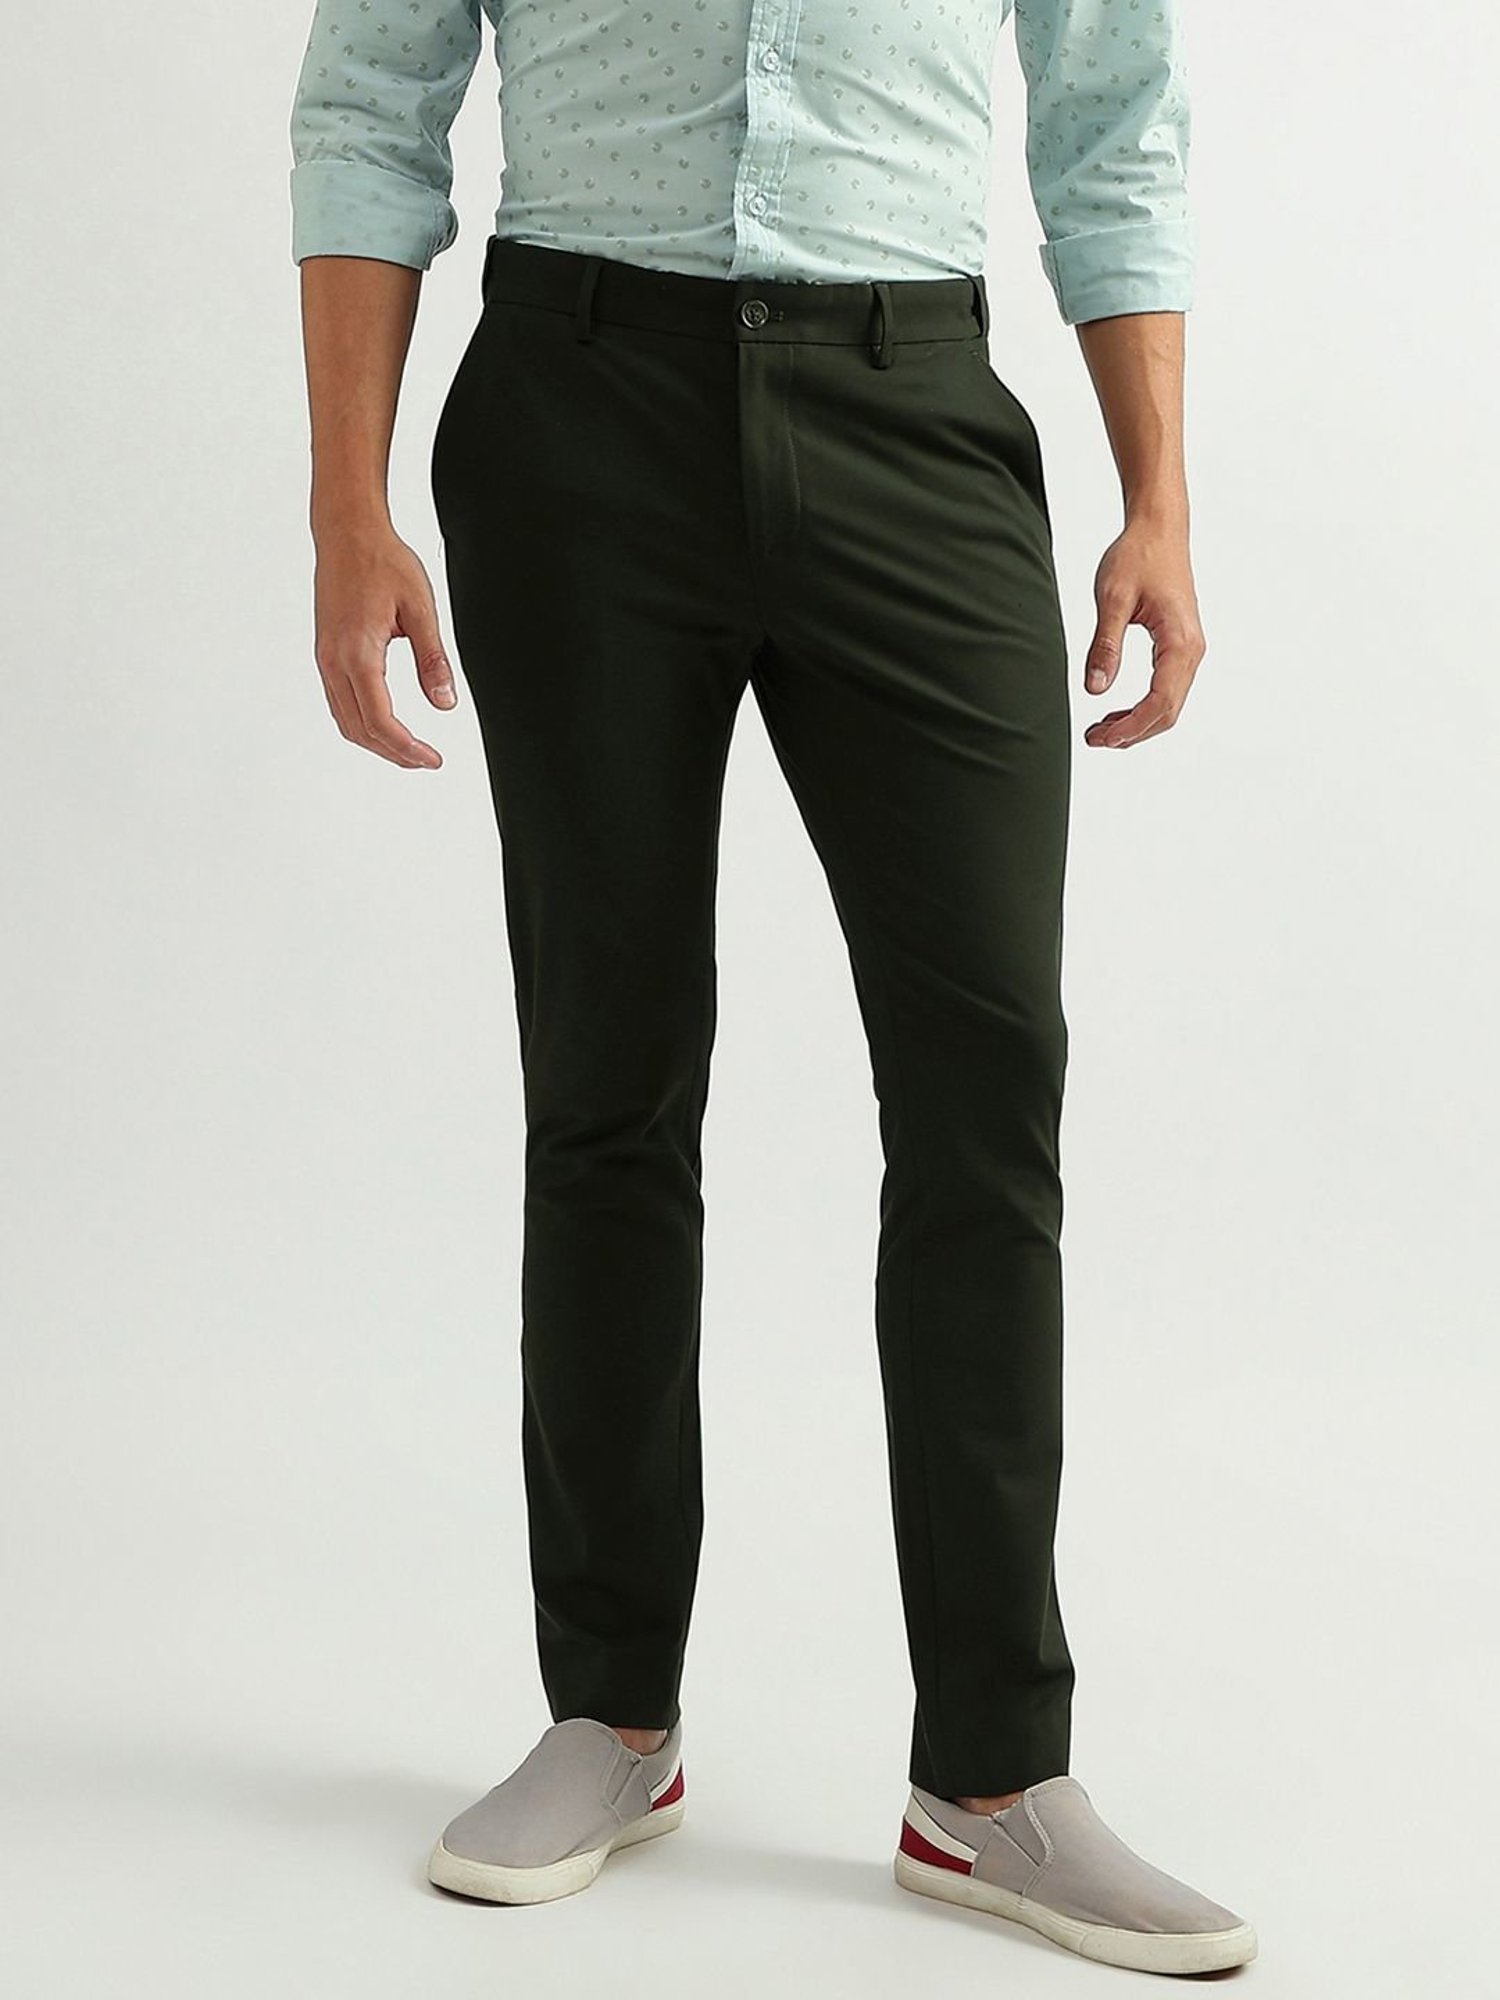 United Colors Of Benetton Trousers  Buy United Colors Of Benetton Trousers  Online in India